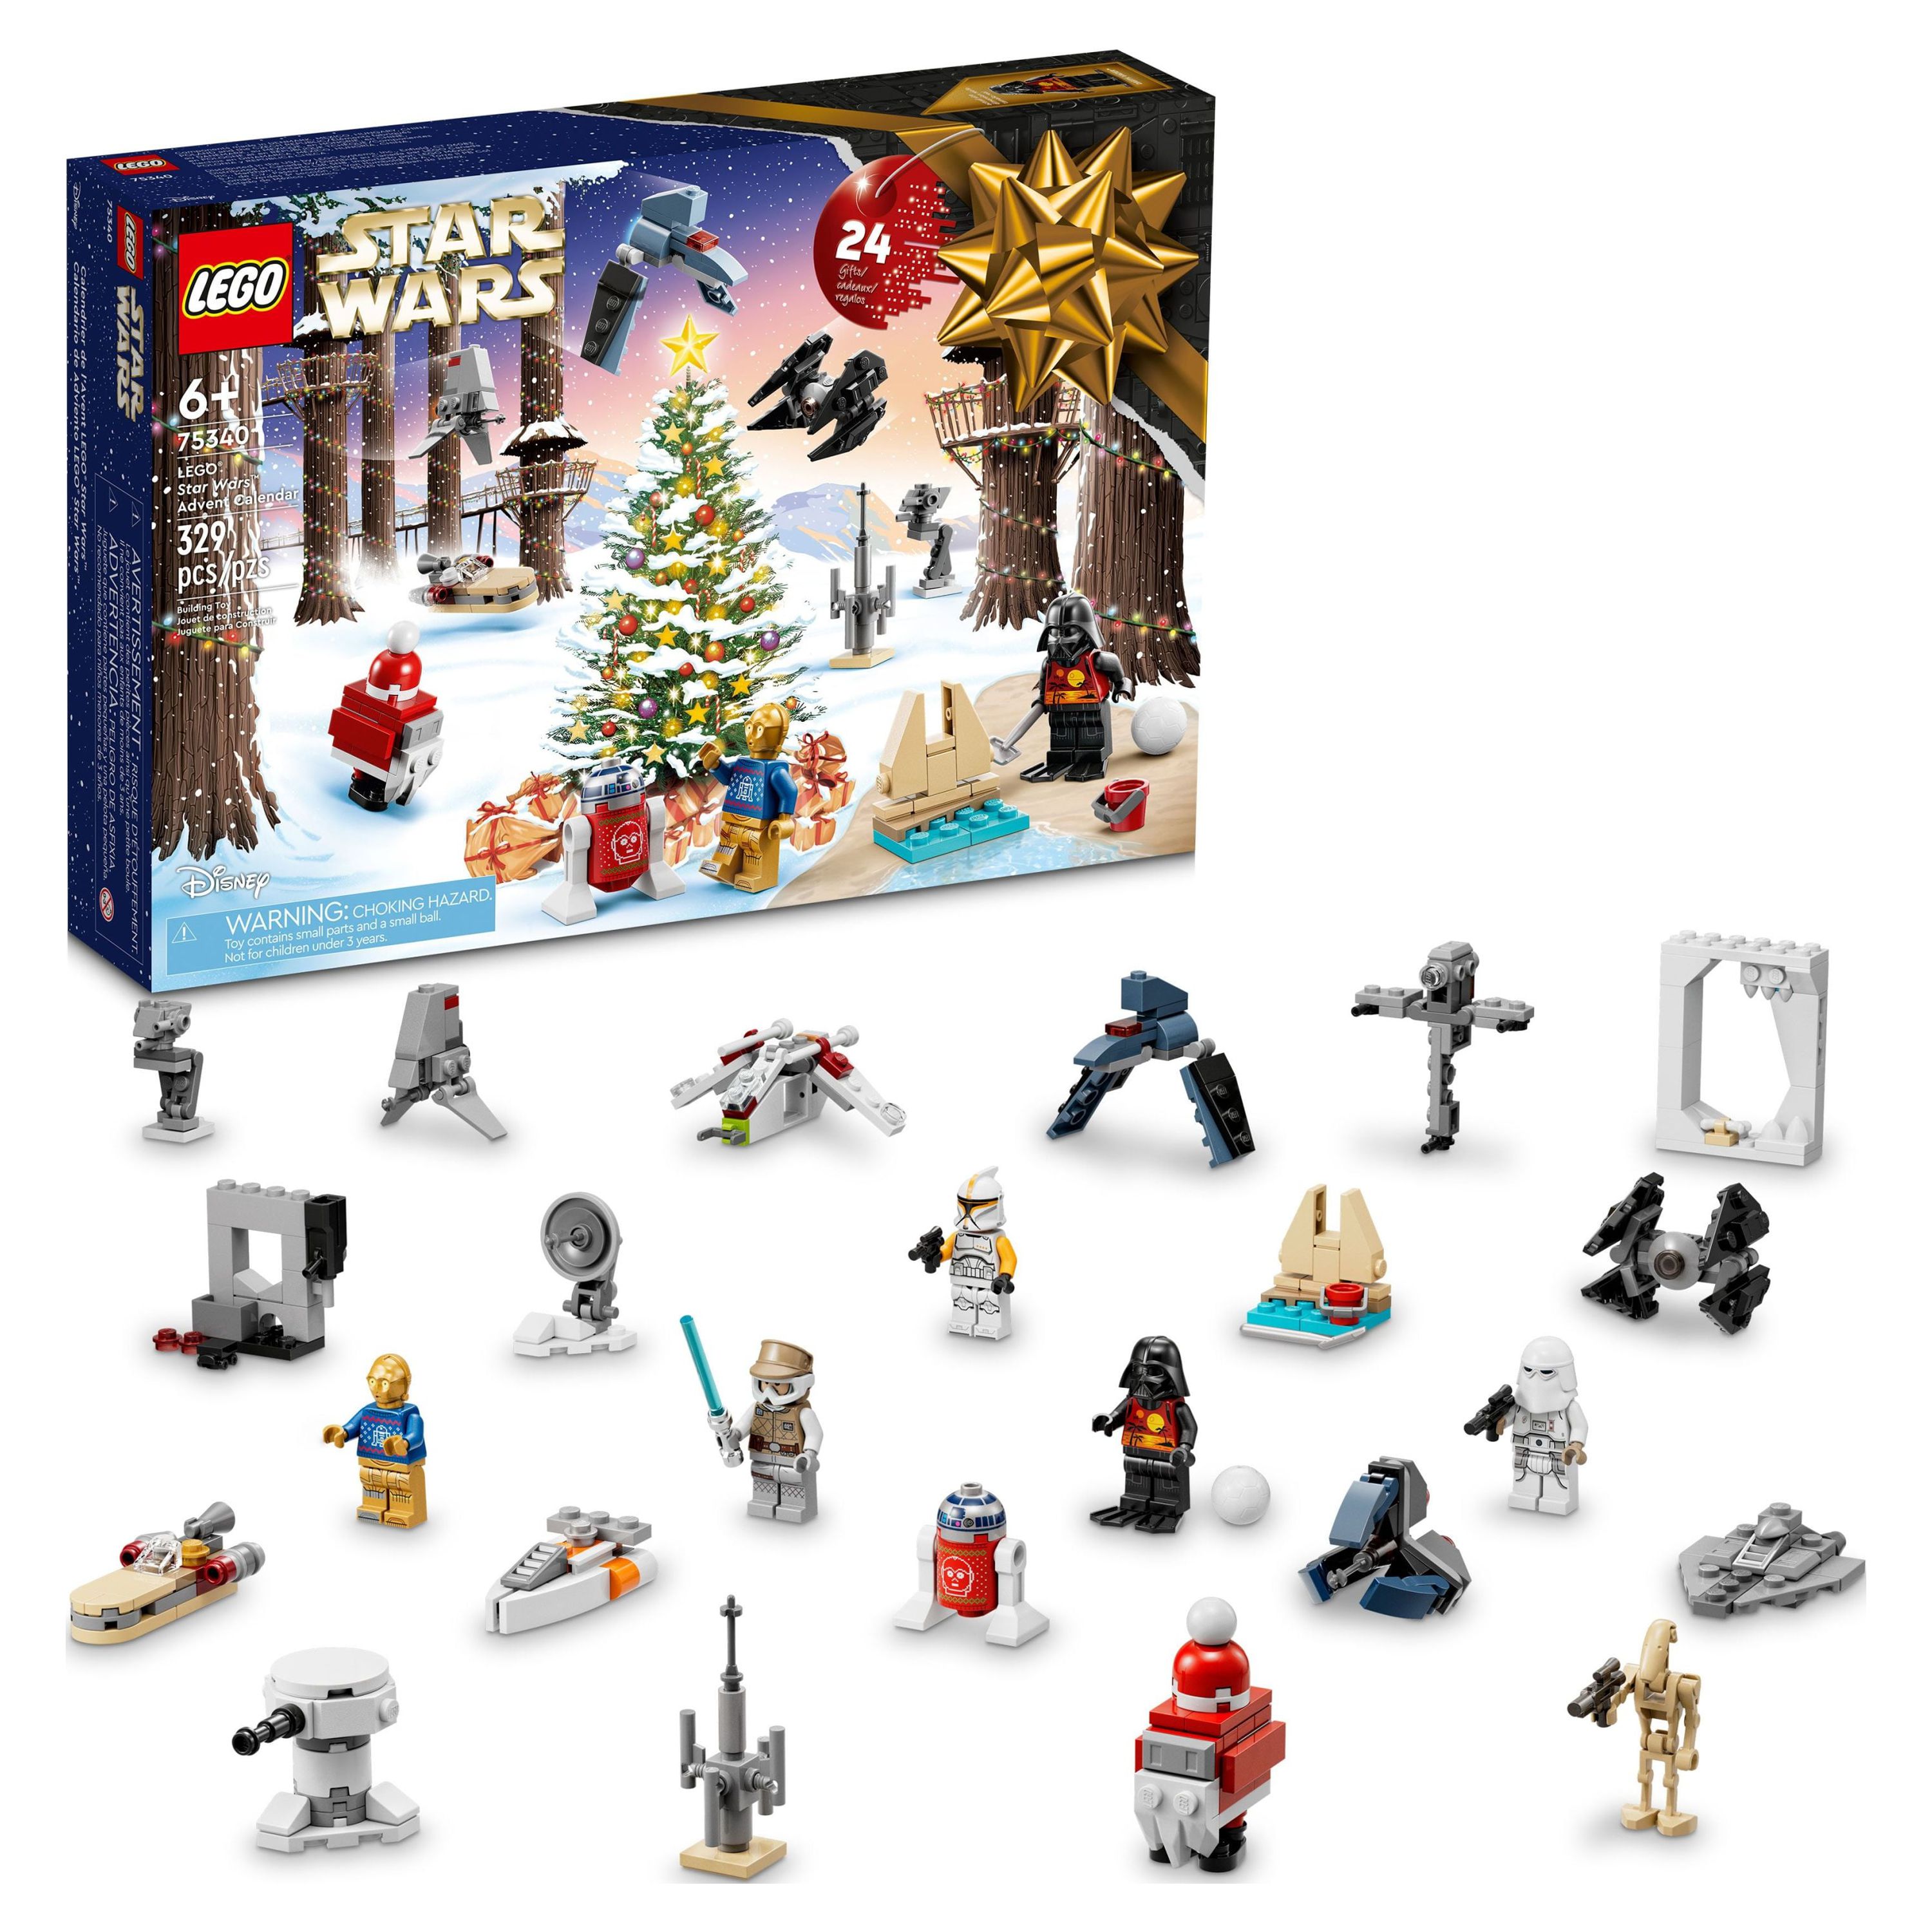 LEGO Star Wars 2022 Advent Calendar 75340 Building Toy Set (329 Pieces) - image 1 of 7